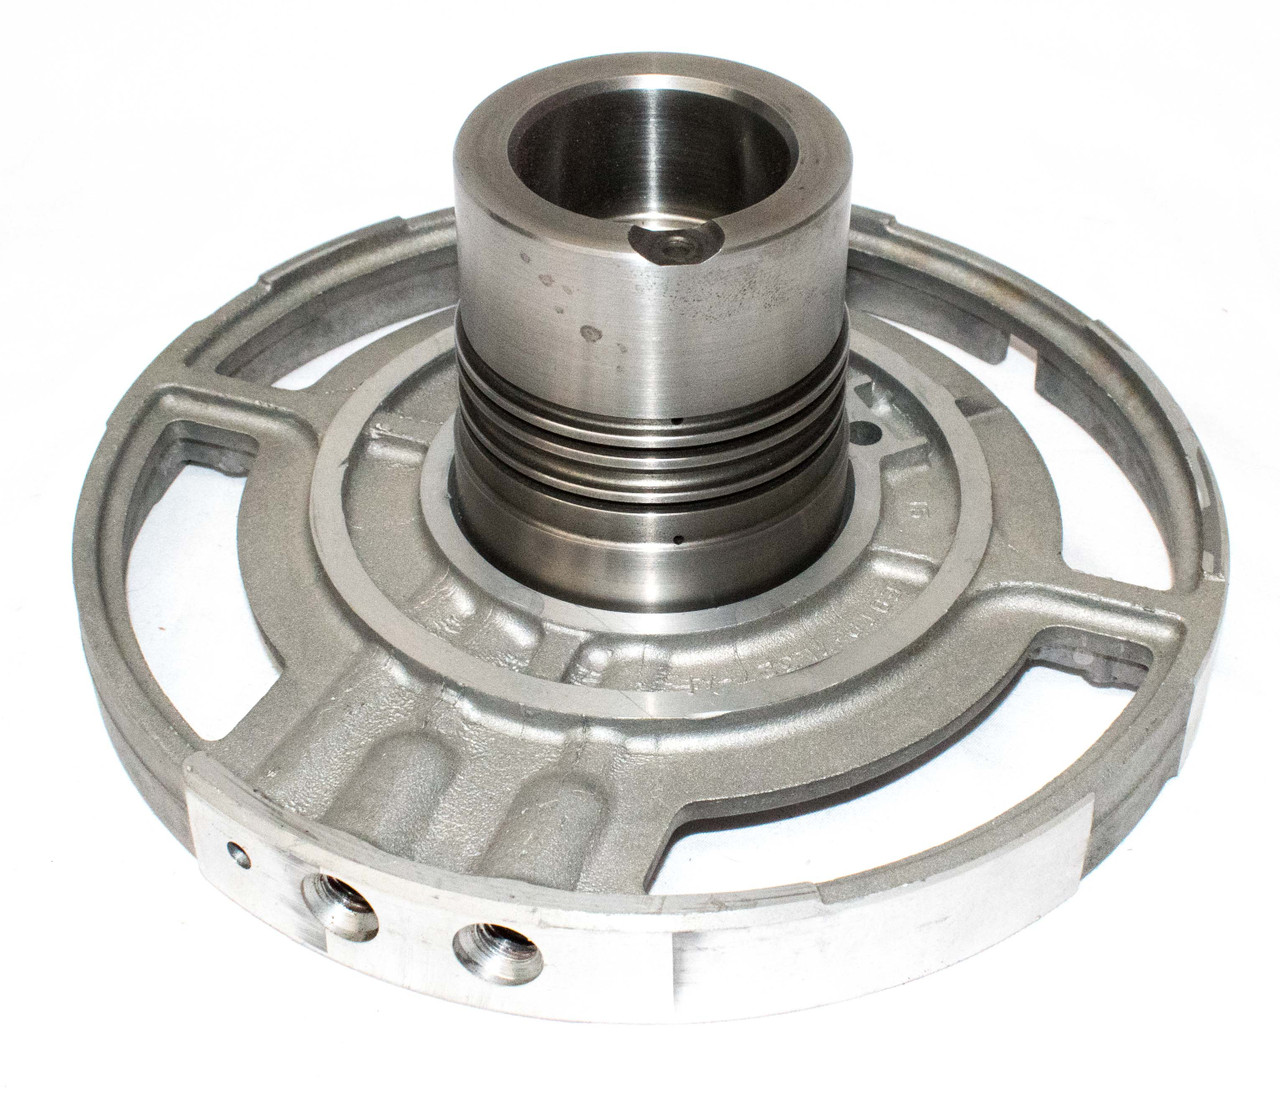 E4OD Center Support w/ Hub - No Bearing Type (USED)